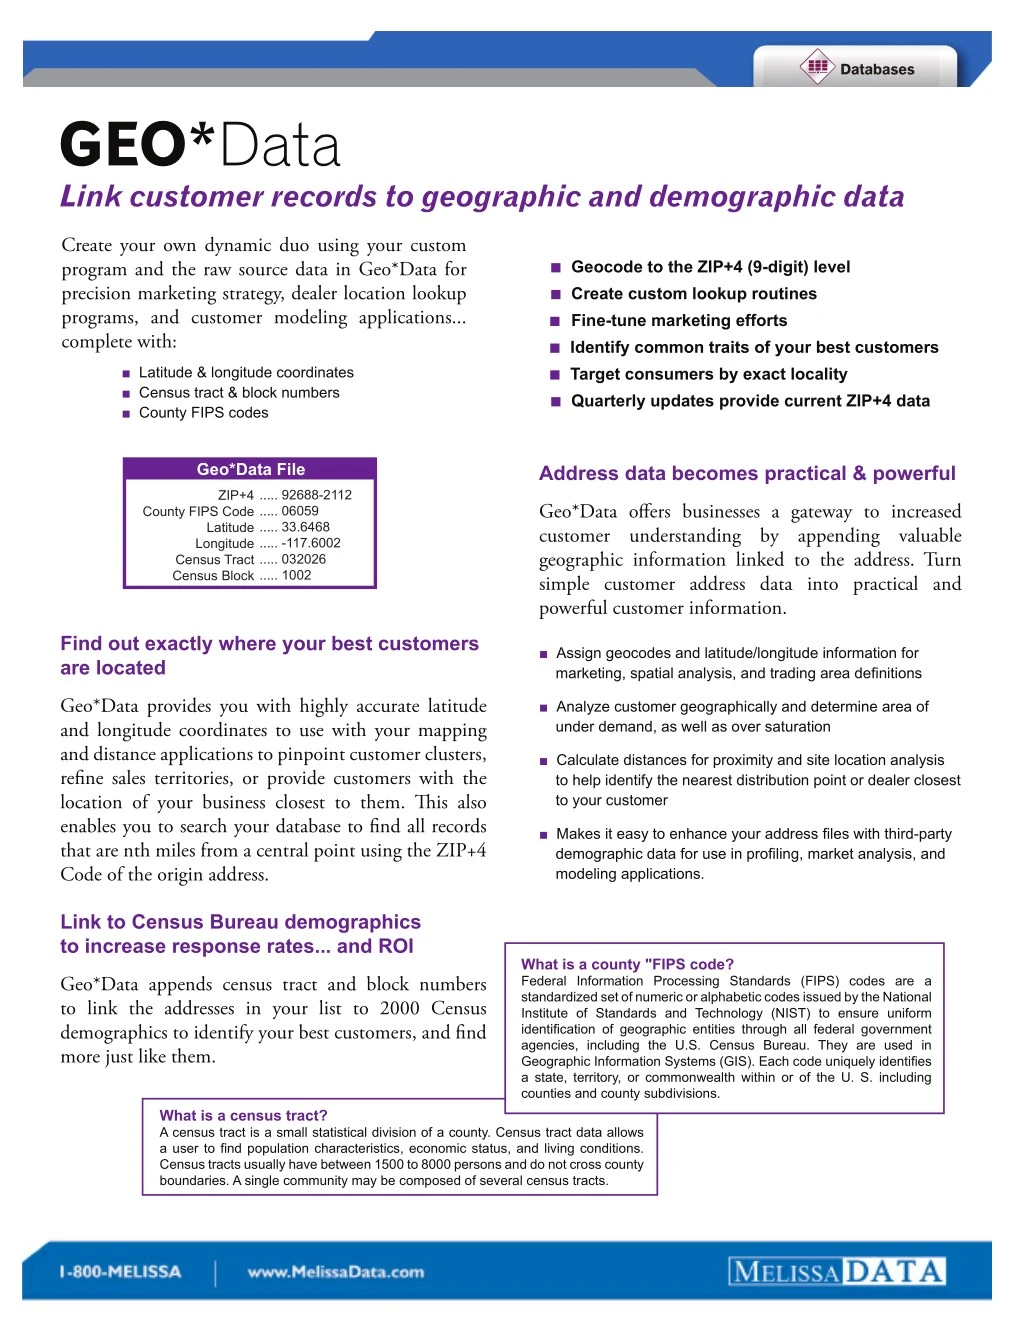 geo data link customer records to geographic